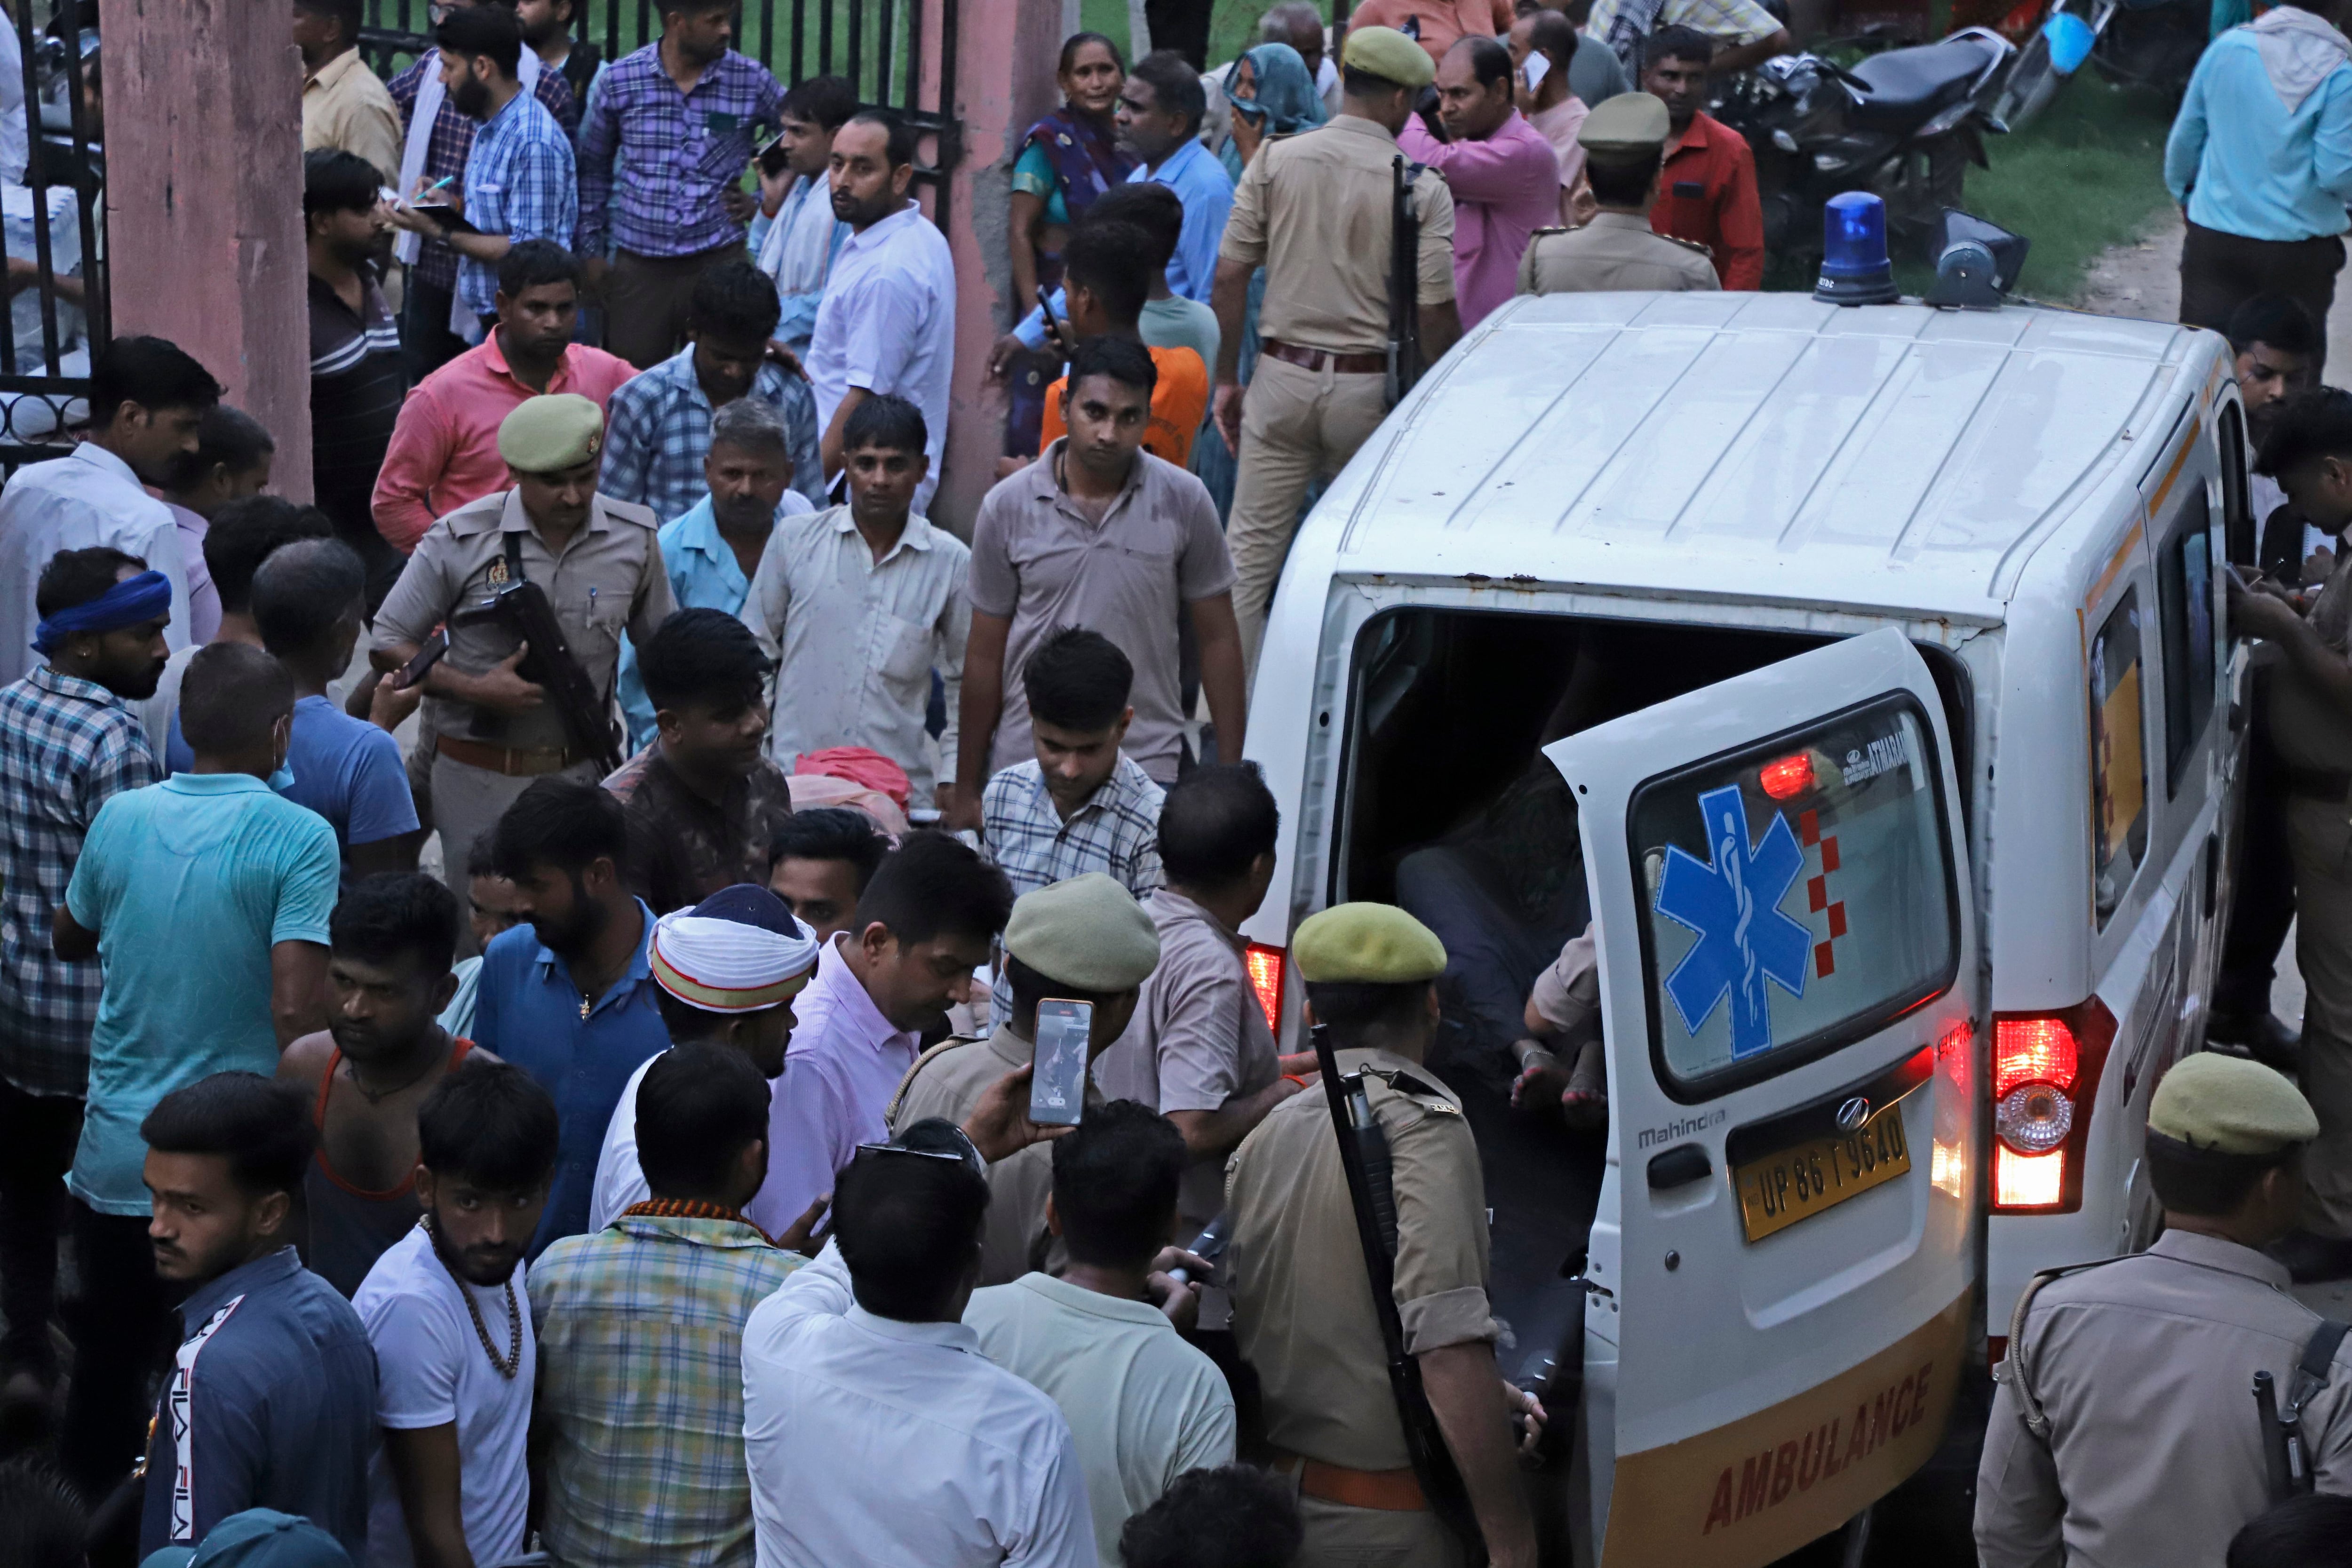 Stampede at religious event in India kills at least 116 people, mostly women and children thumbnail